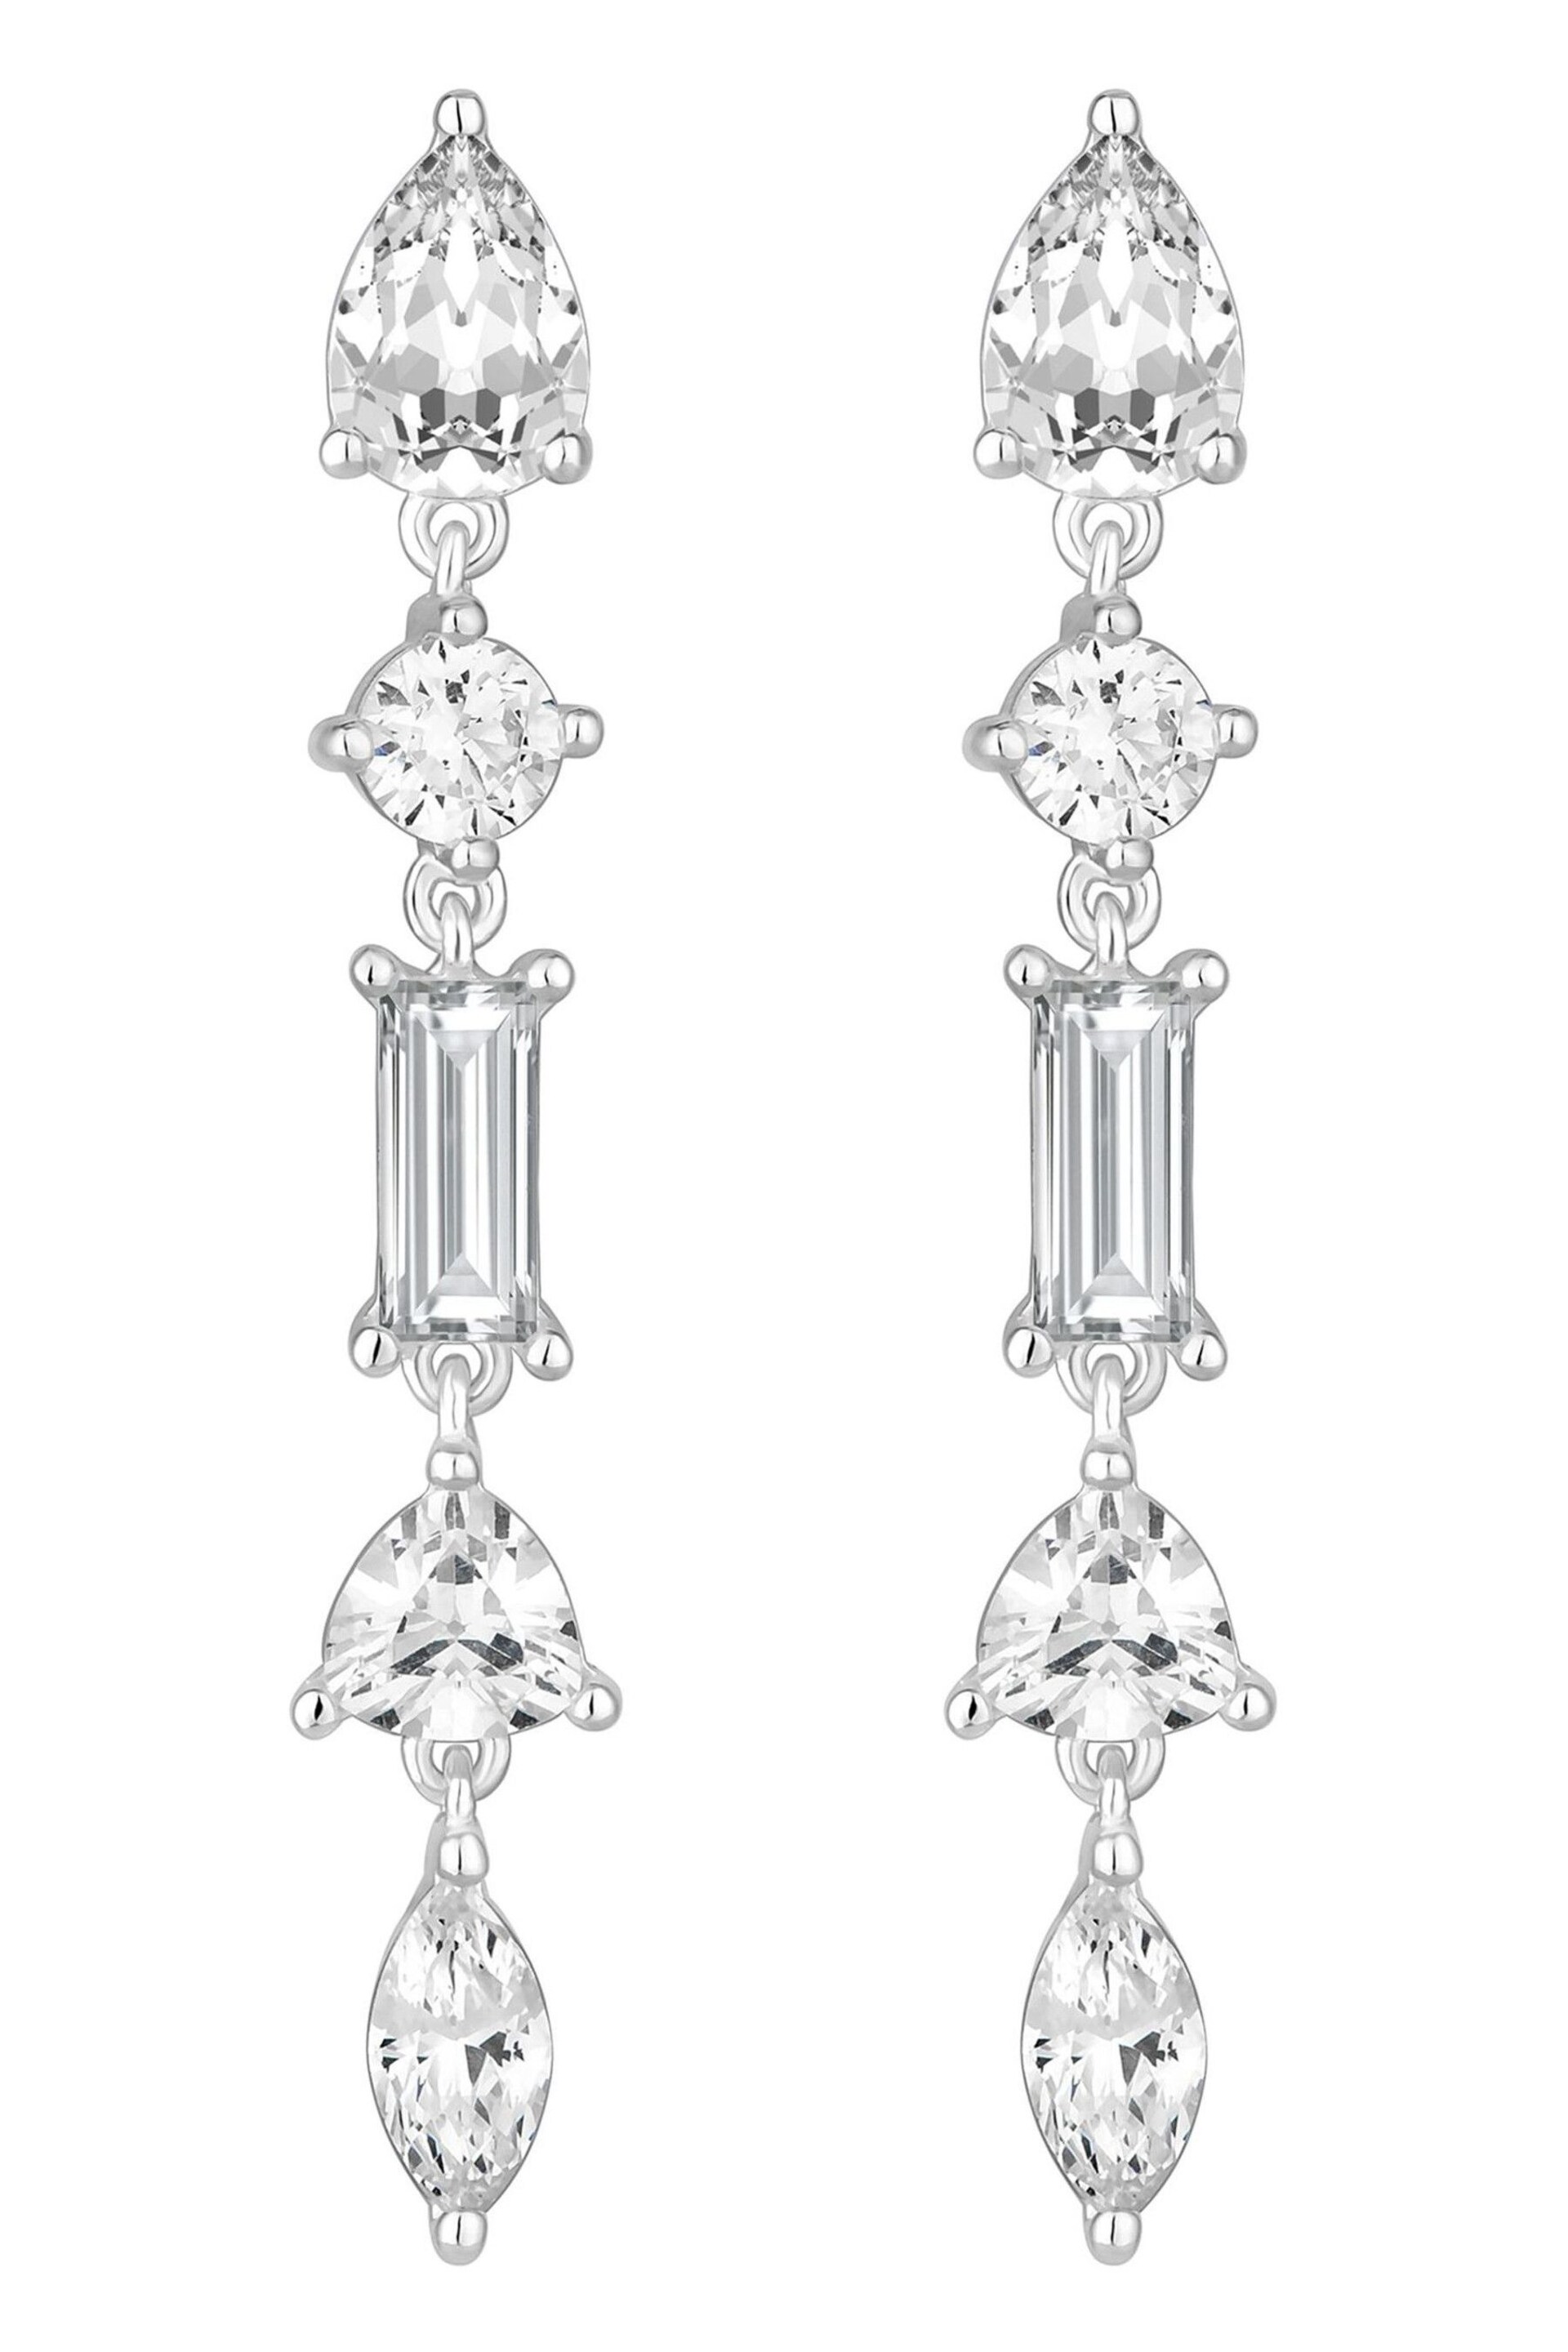 Simply Silver Silver Cubic Zirconia Mixed Stone Drop Earrings - Image 1 of 2